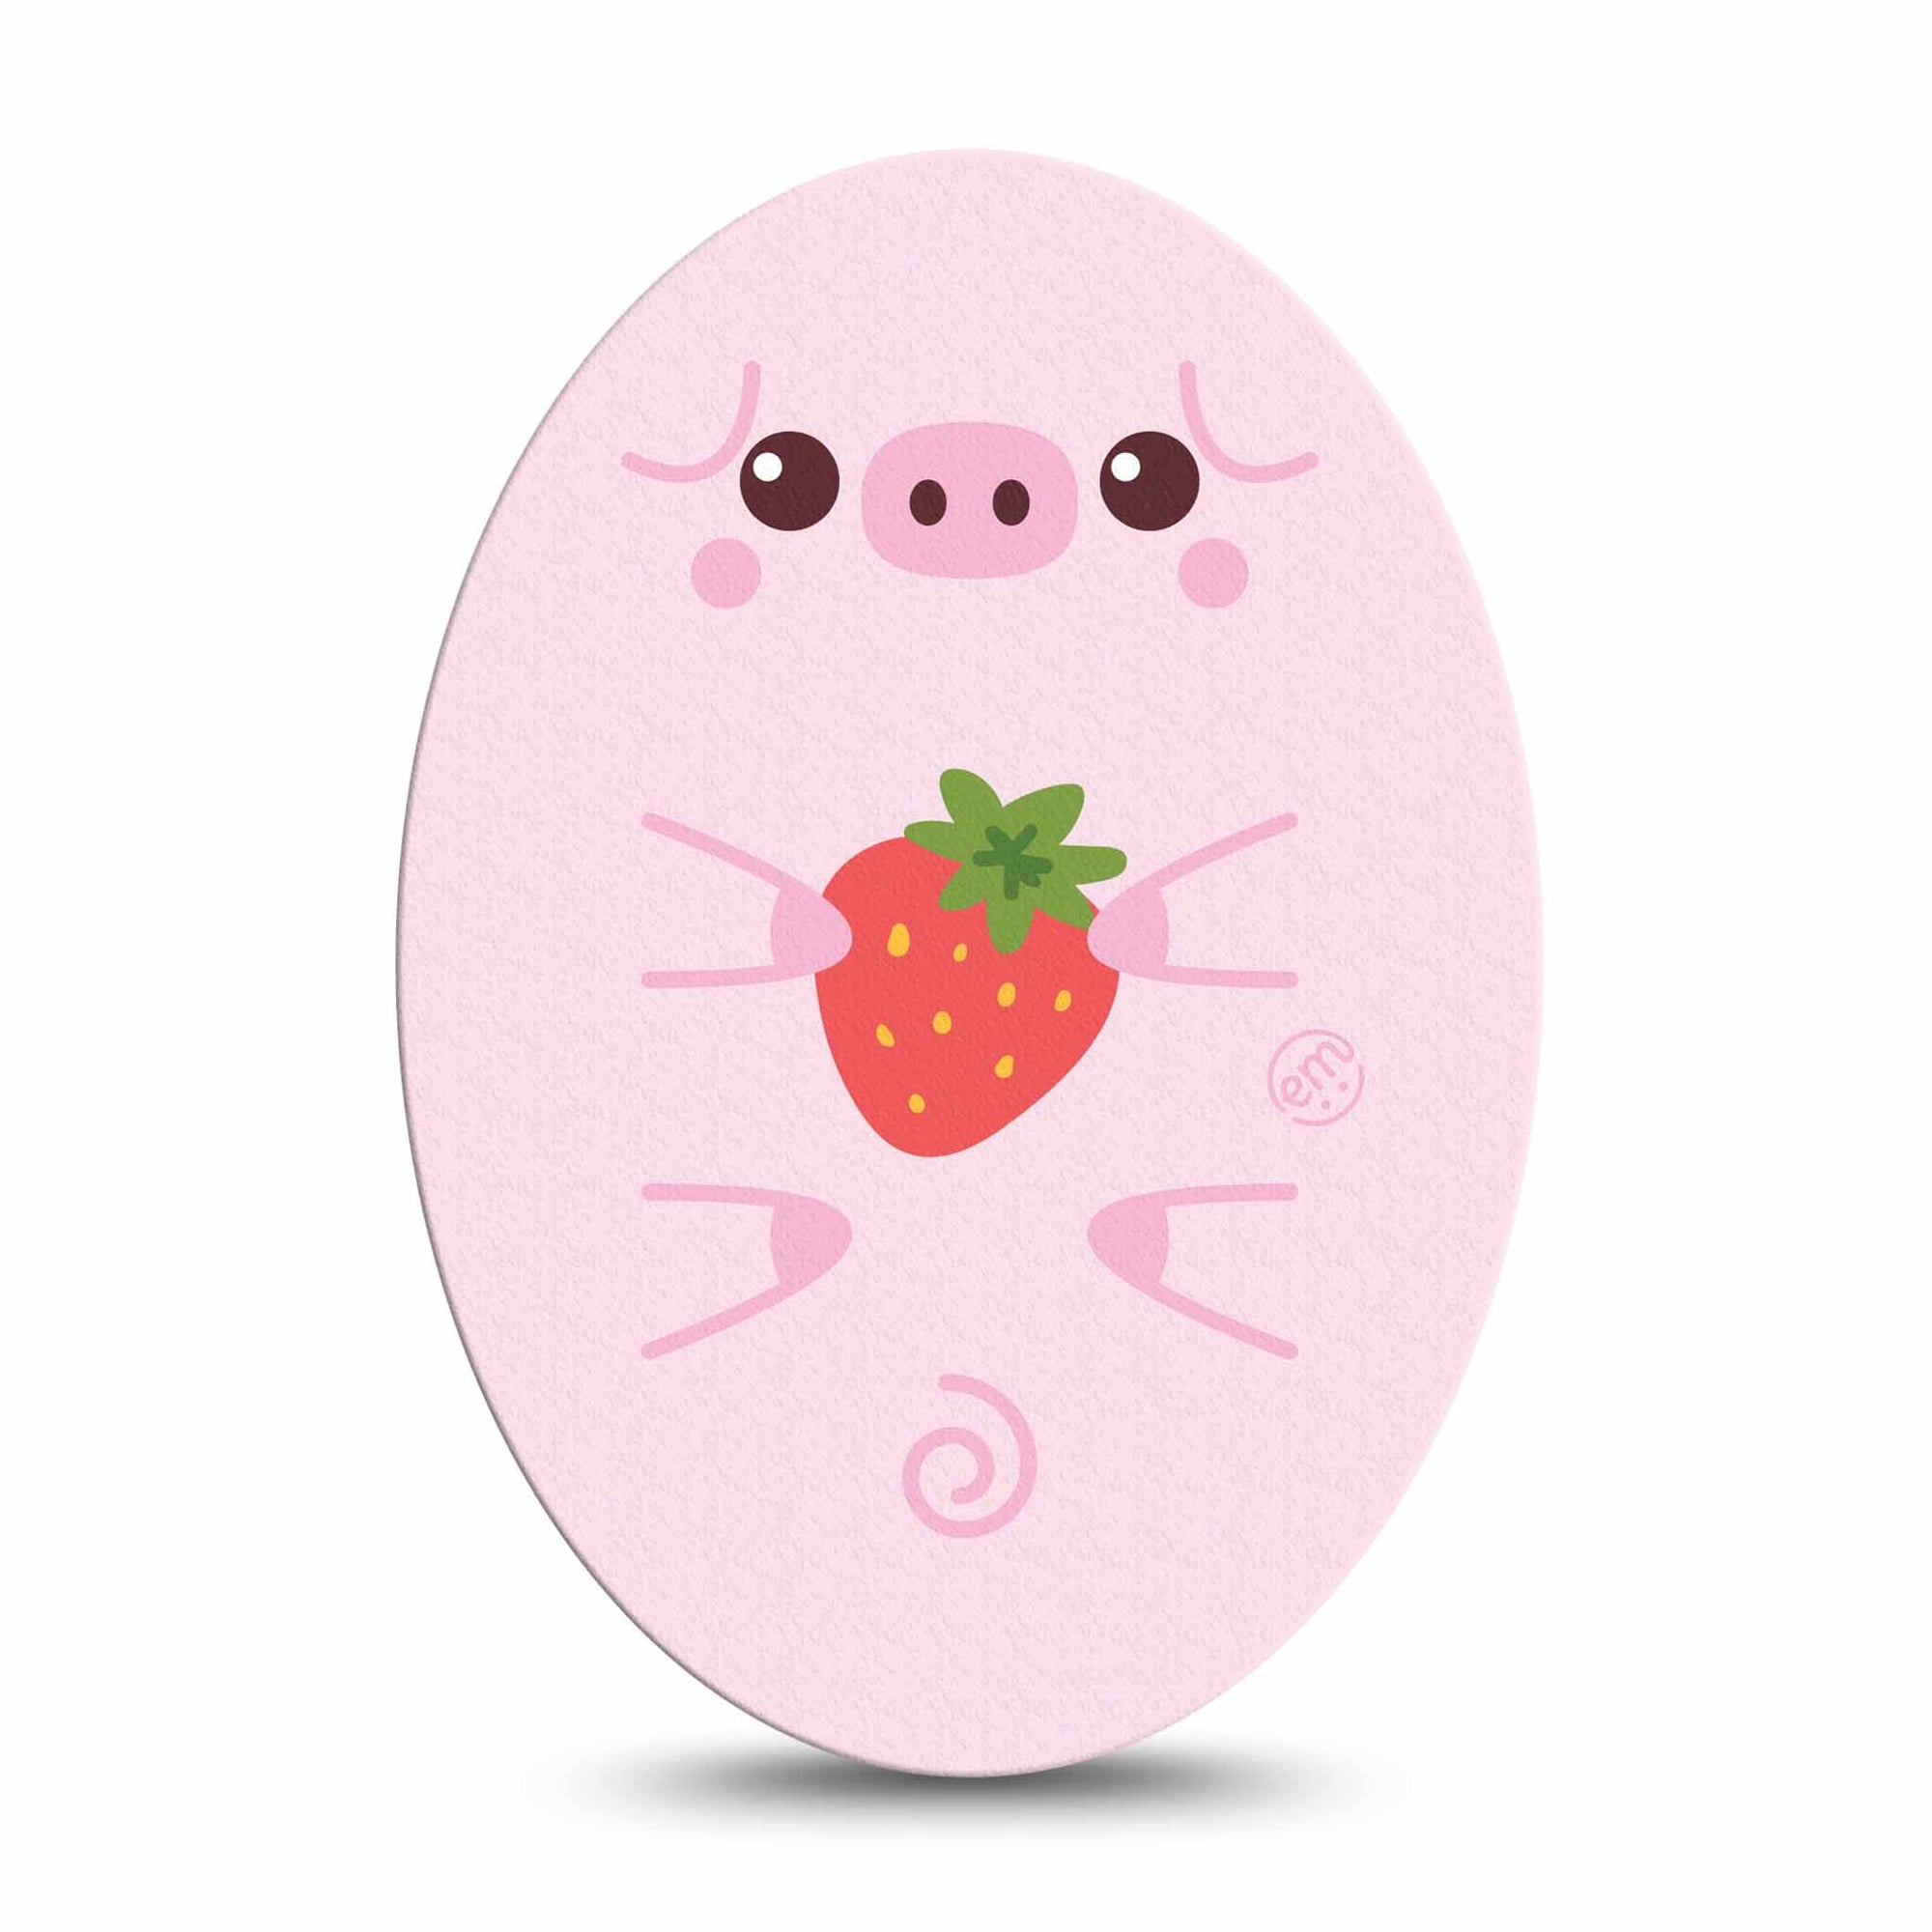 ExpressionMed Strawberry Piglet Medtronic Guardian Enlite Universal Oval Single strawberries Plaster Continuous Glucose Monitor Design